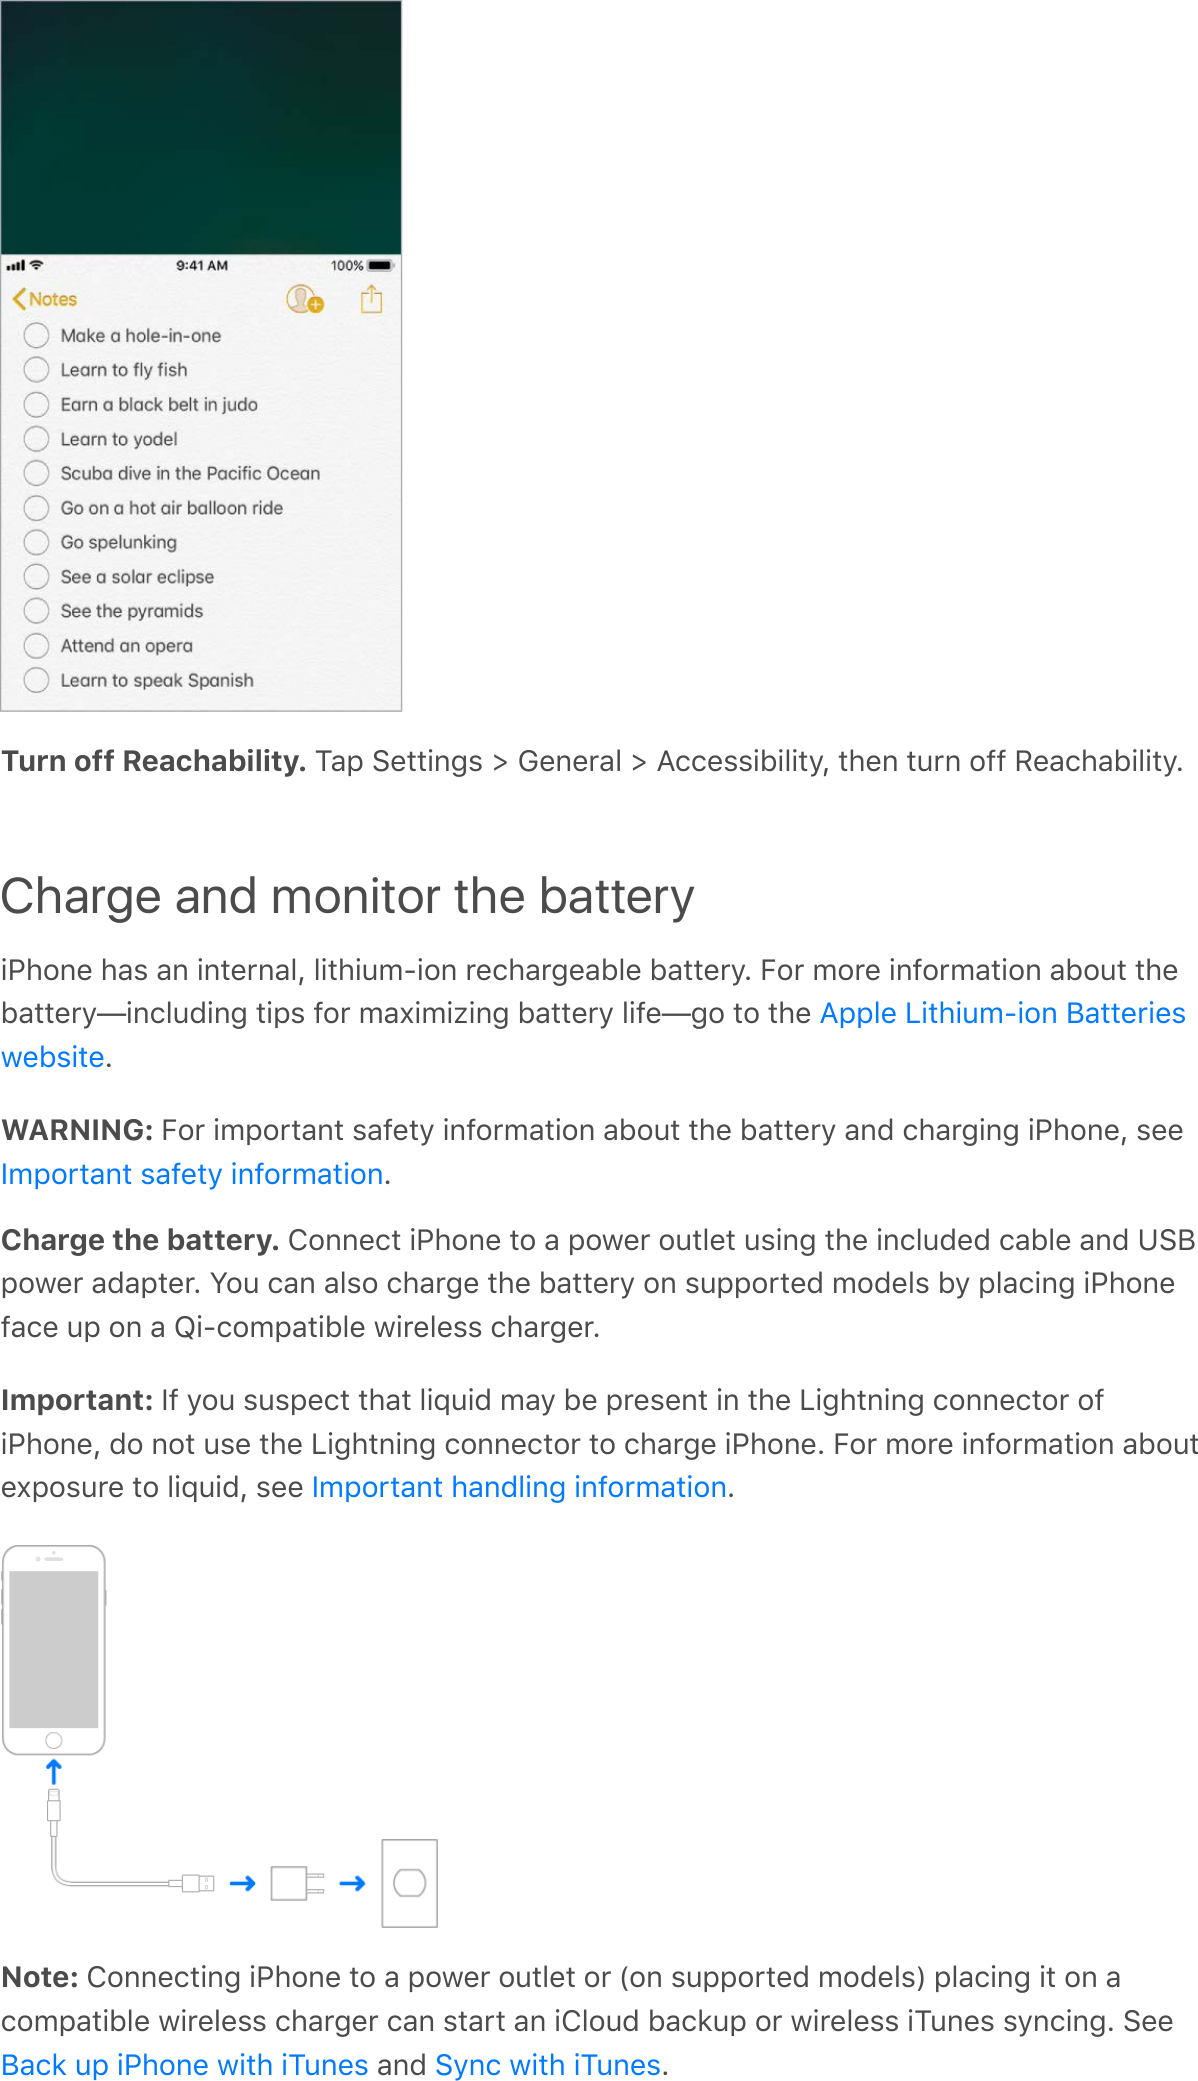 Turn off Reachability. Tap Settings &gt; General &gt; Accessibility, then turn off Reachability.Charge and monitor the batteryiPhone has an internal, lithium-ion rechargeable battery. For more information about thebattery—including tips for maximizing battery life—go to the .WARNING: For important safety information about the battery and charging iPhone, see.Charge the battery. Connect iPhone to a power outlet using the included cable and USBpower adapter. You can also charge the battery on supported models by placing iPhoneface up on a Qi-compatible wireless charger.Important: If you suspect that liquid may be present in the Lightning connector ofiPhone, do not use the Lightning connector to charge iPhone. For more information aboutexposure to liquid, see  .Note: Connecting iPhone to a power outlet or (on supported models) placing it on acompatible wireless charger can start an iCloud backup or wireless iTunes syncing. See and  .Apple Lithium-ion BatterieswebsiteImportant safety informationImportant handling informationBack up iPhone with iTunes Sync with iTunes